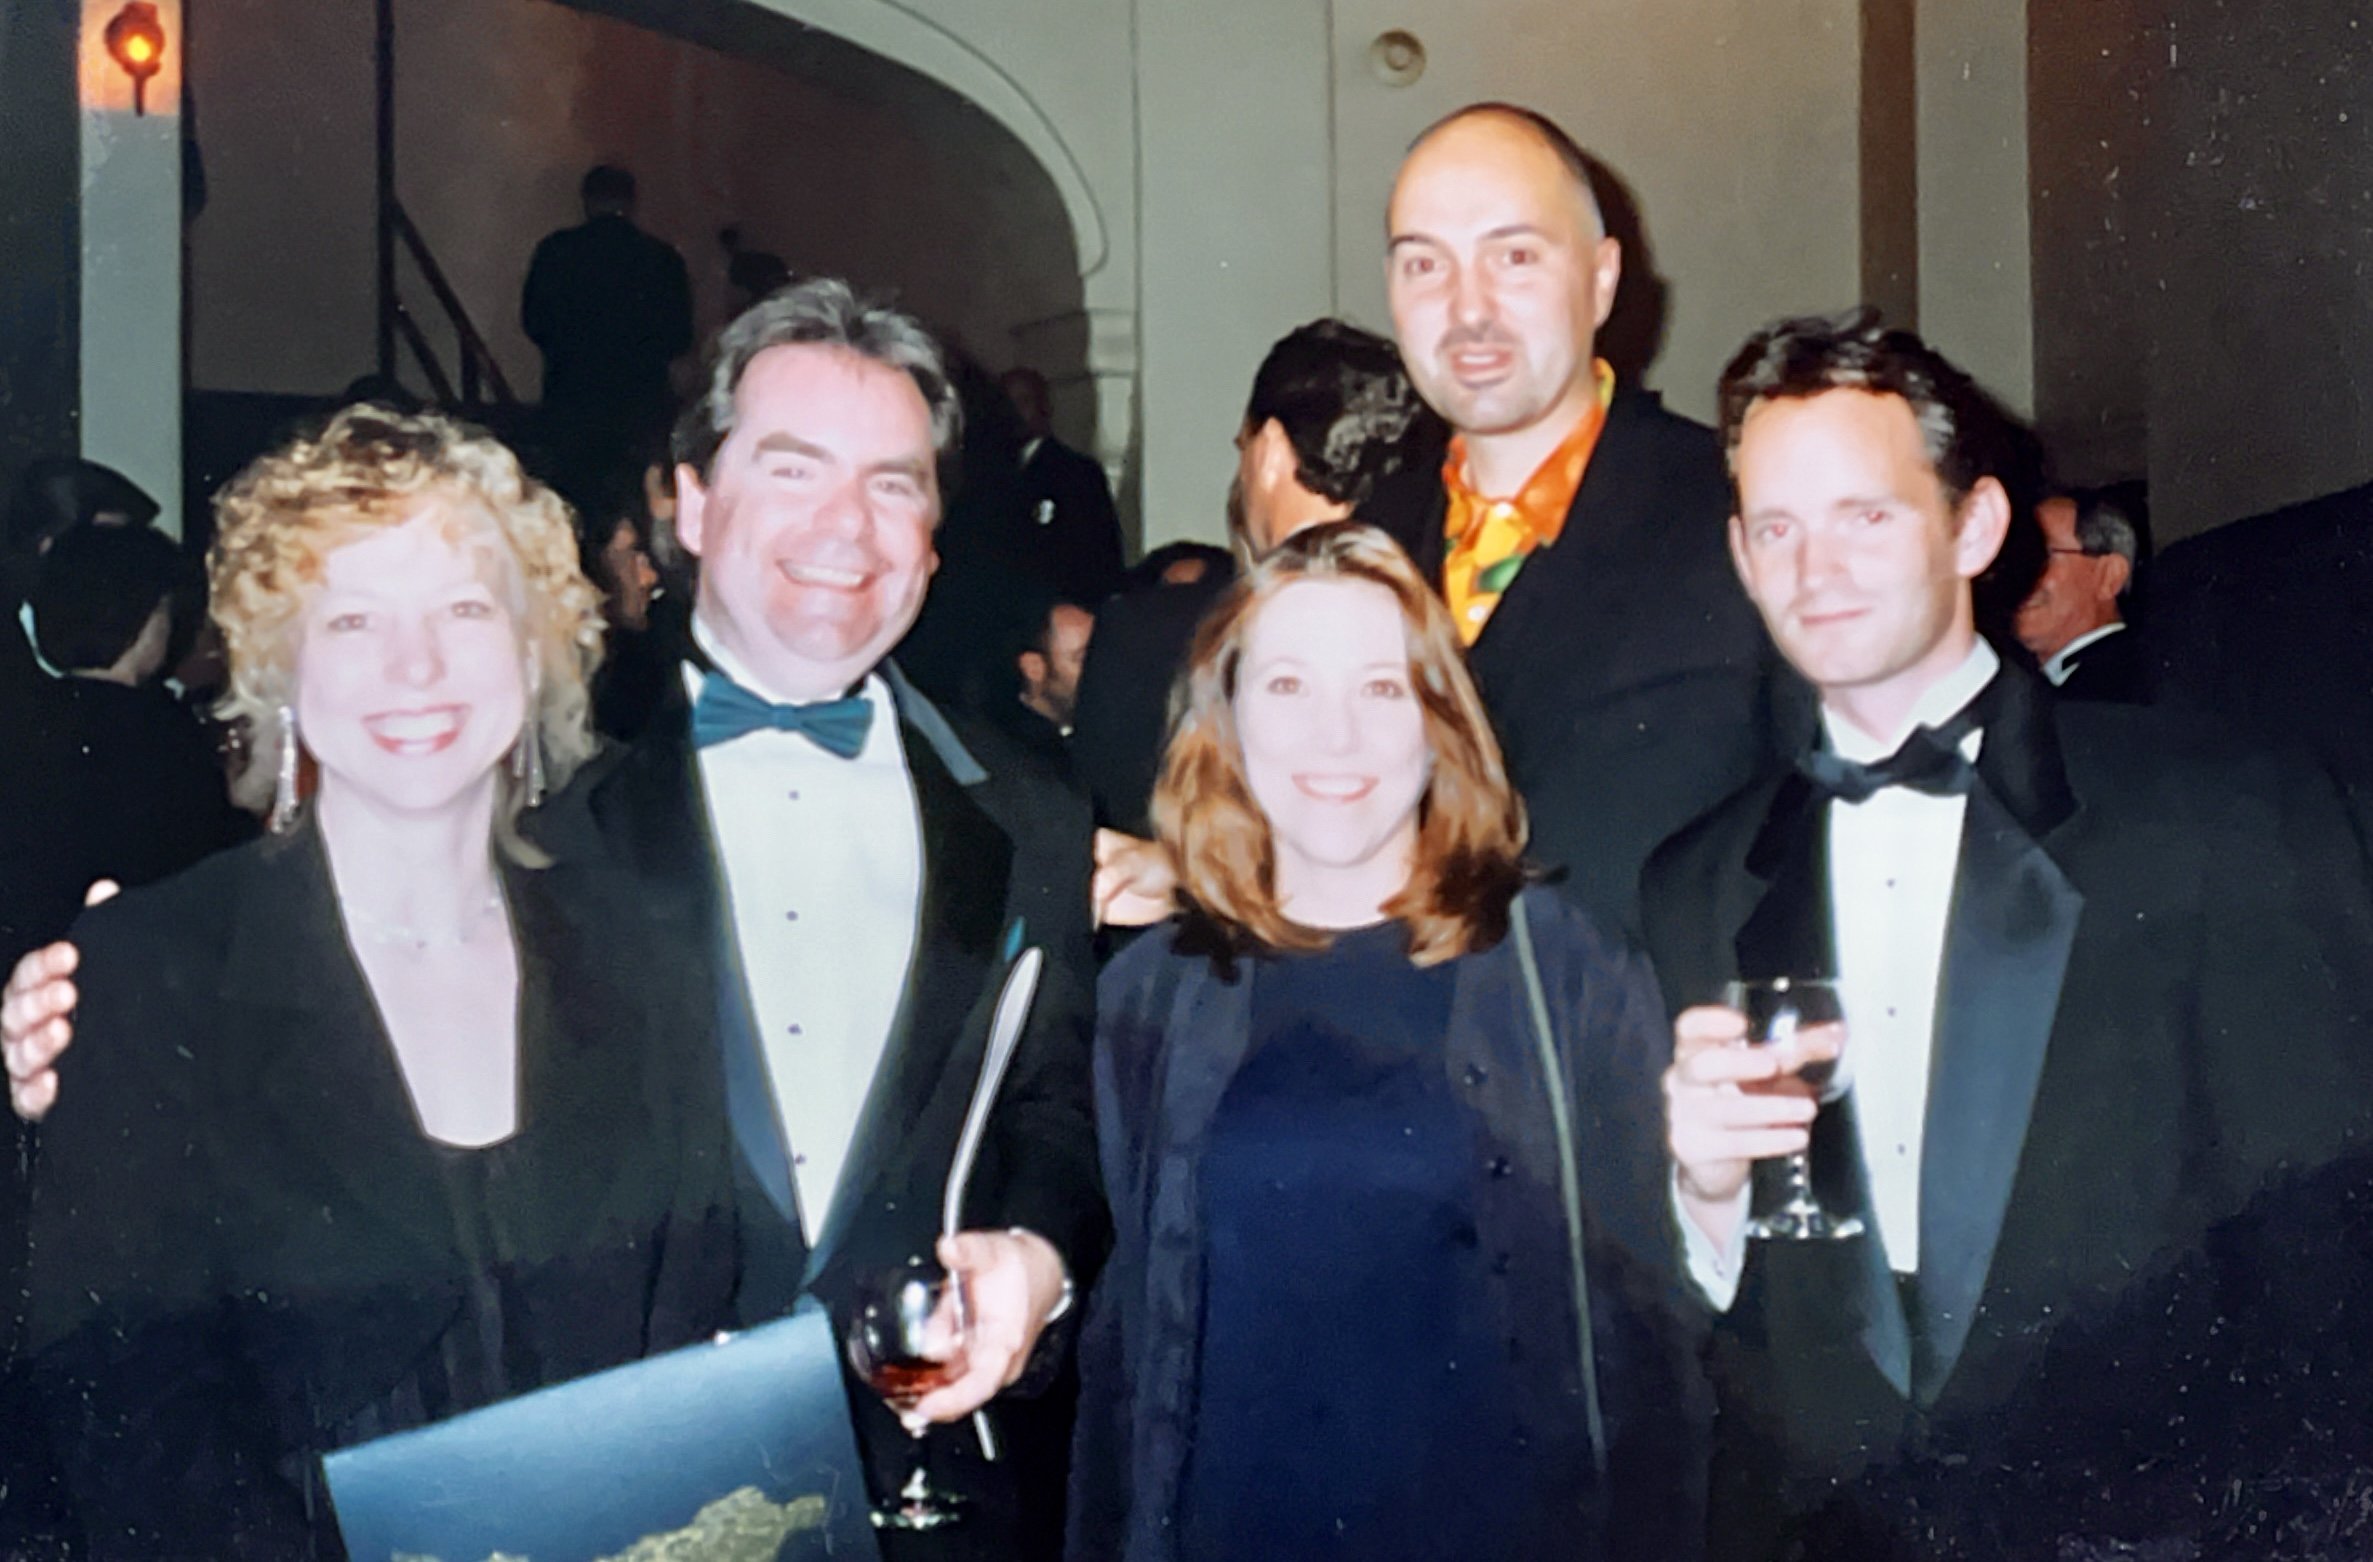  Euan at the Oscar’s. From left to right, Patty Blau, Kevin Rafferty, Judith Weaver, Roger Guyett, and Euan Macdonald 